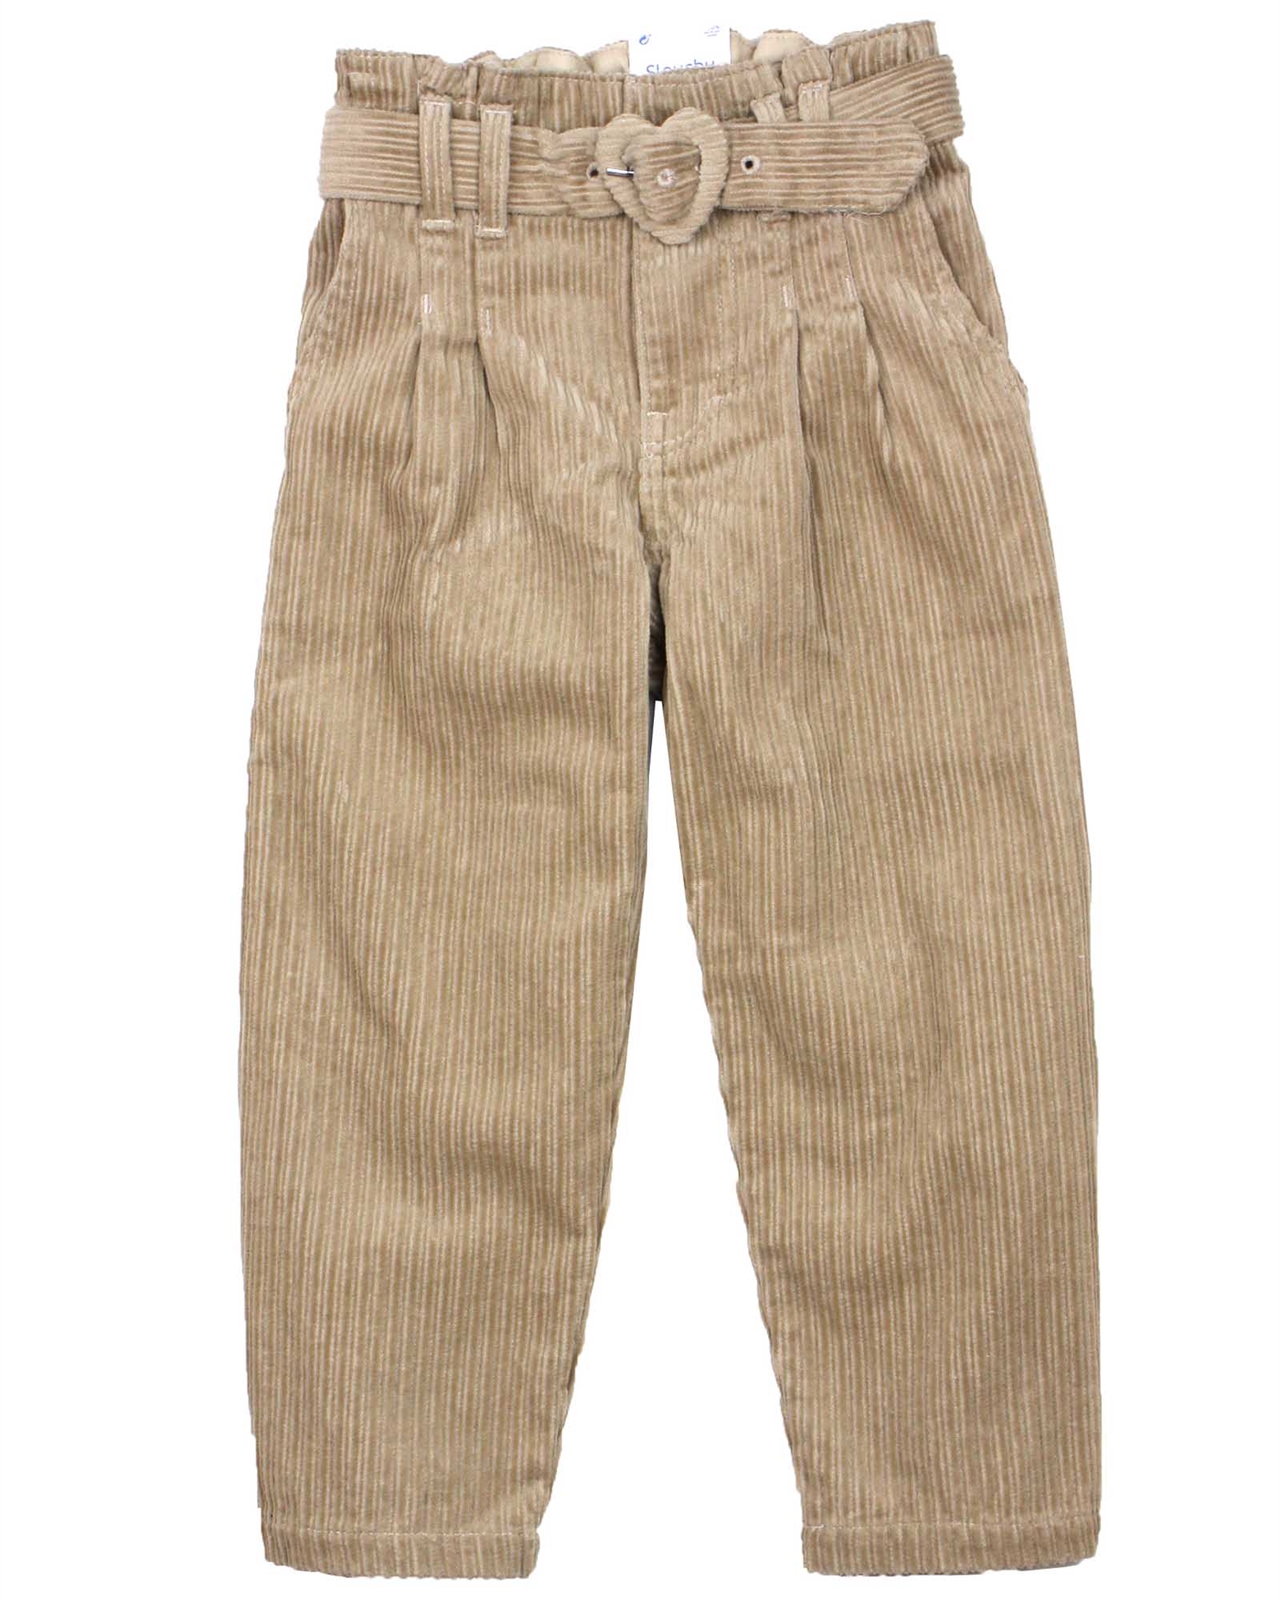 Mayoral Girl's Thick Corduroy Slouchy Pants - Mayoral - Mayoral